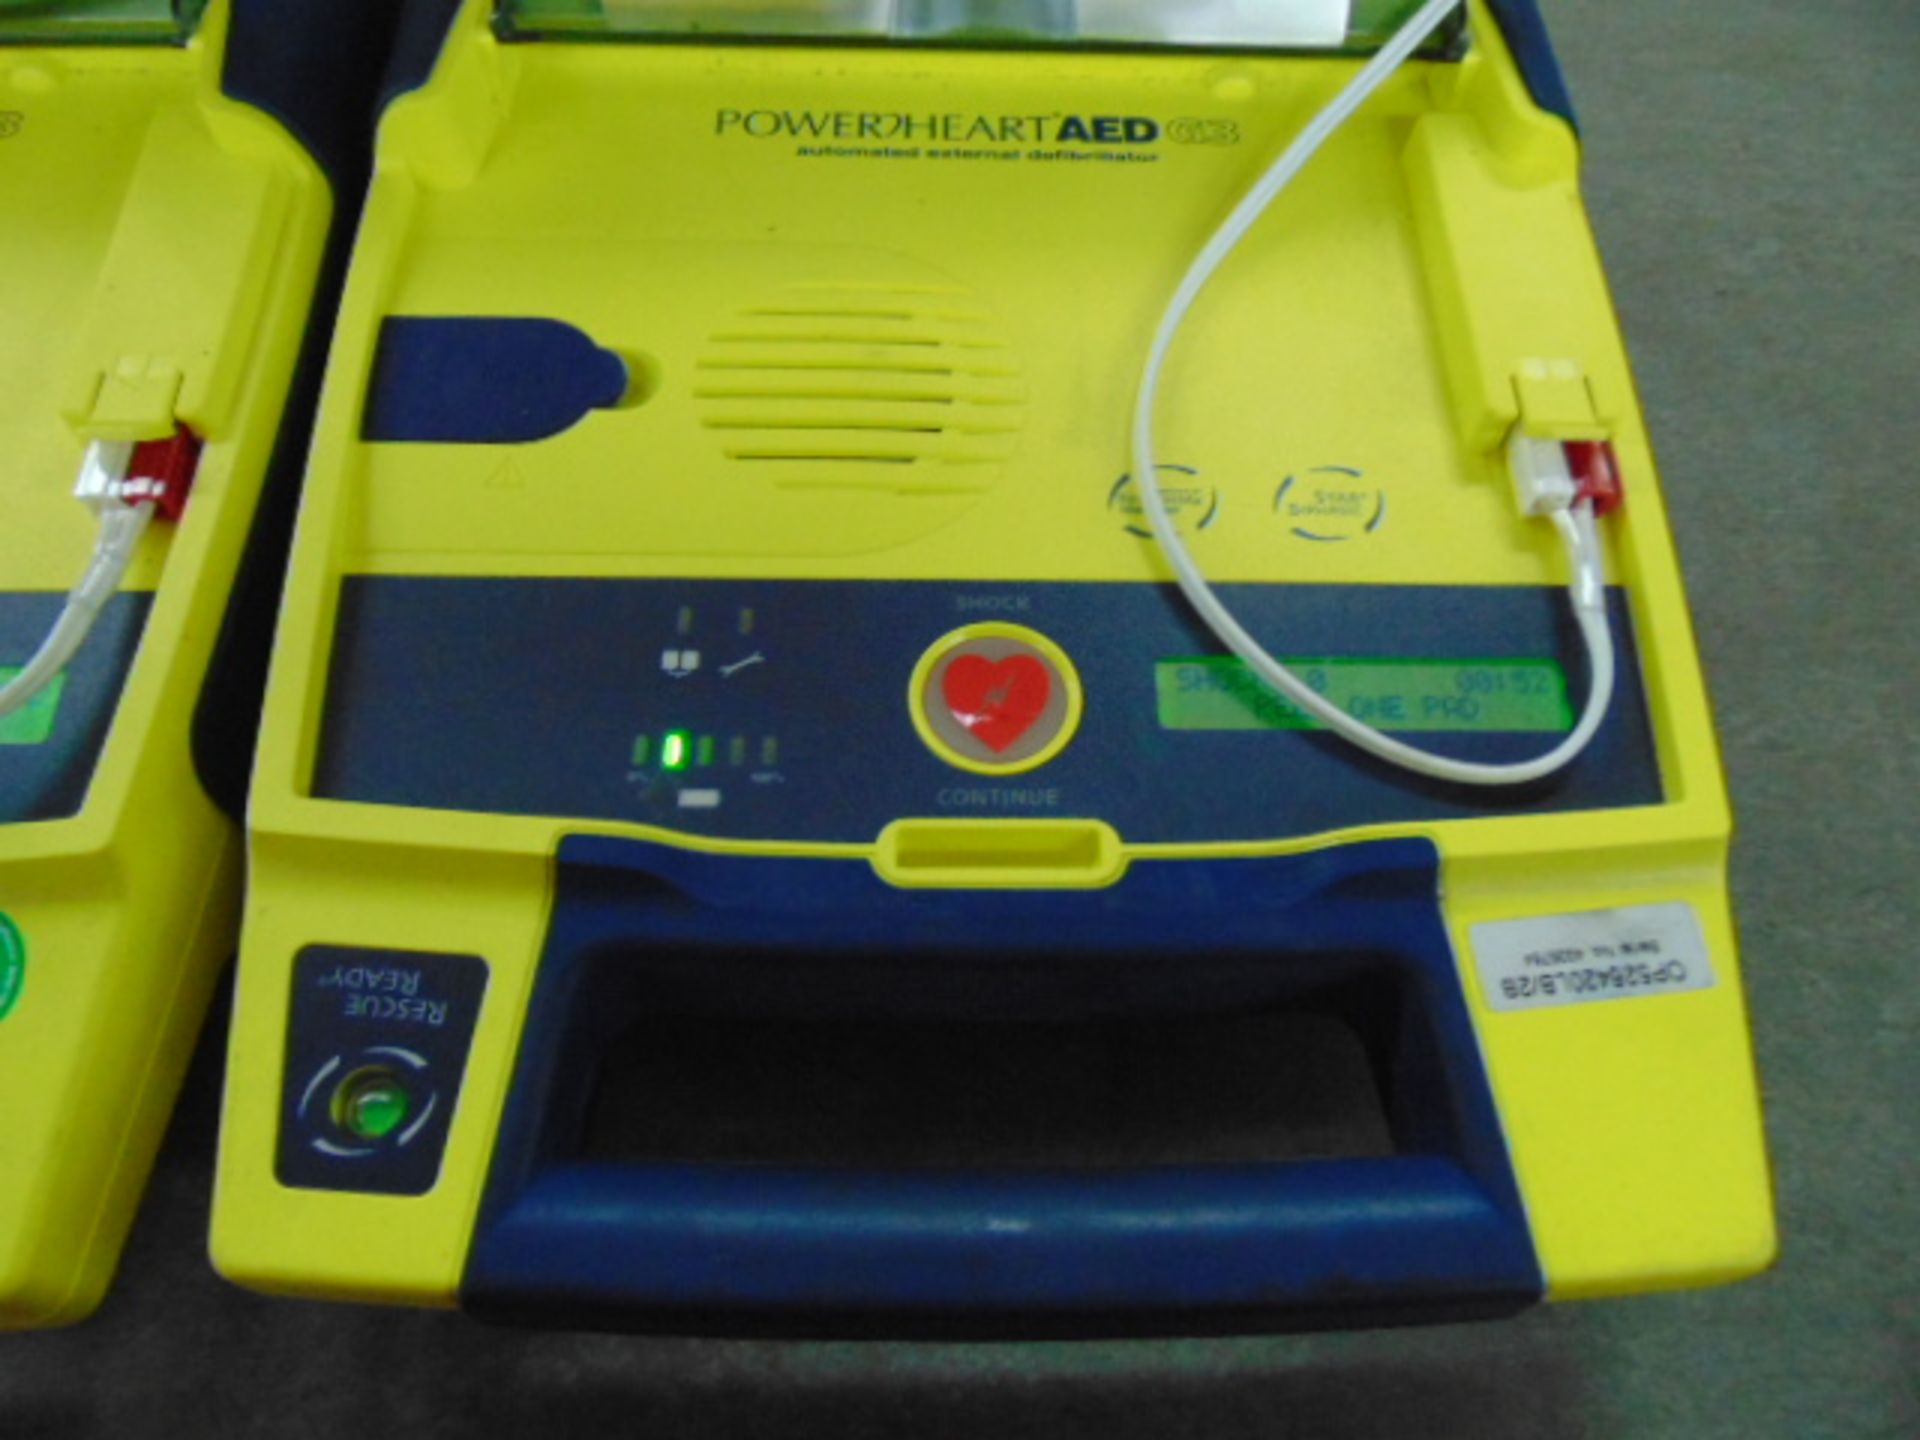 2 x Cardiac Science Powerheart G3 Automatic AED Automatic External Defribrillators - Image 5 of 12